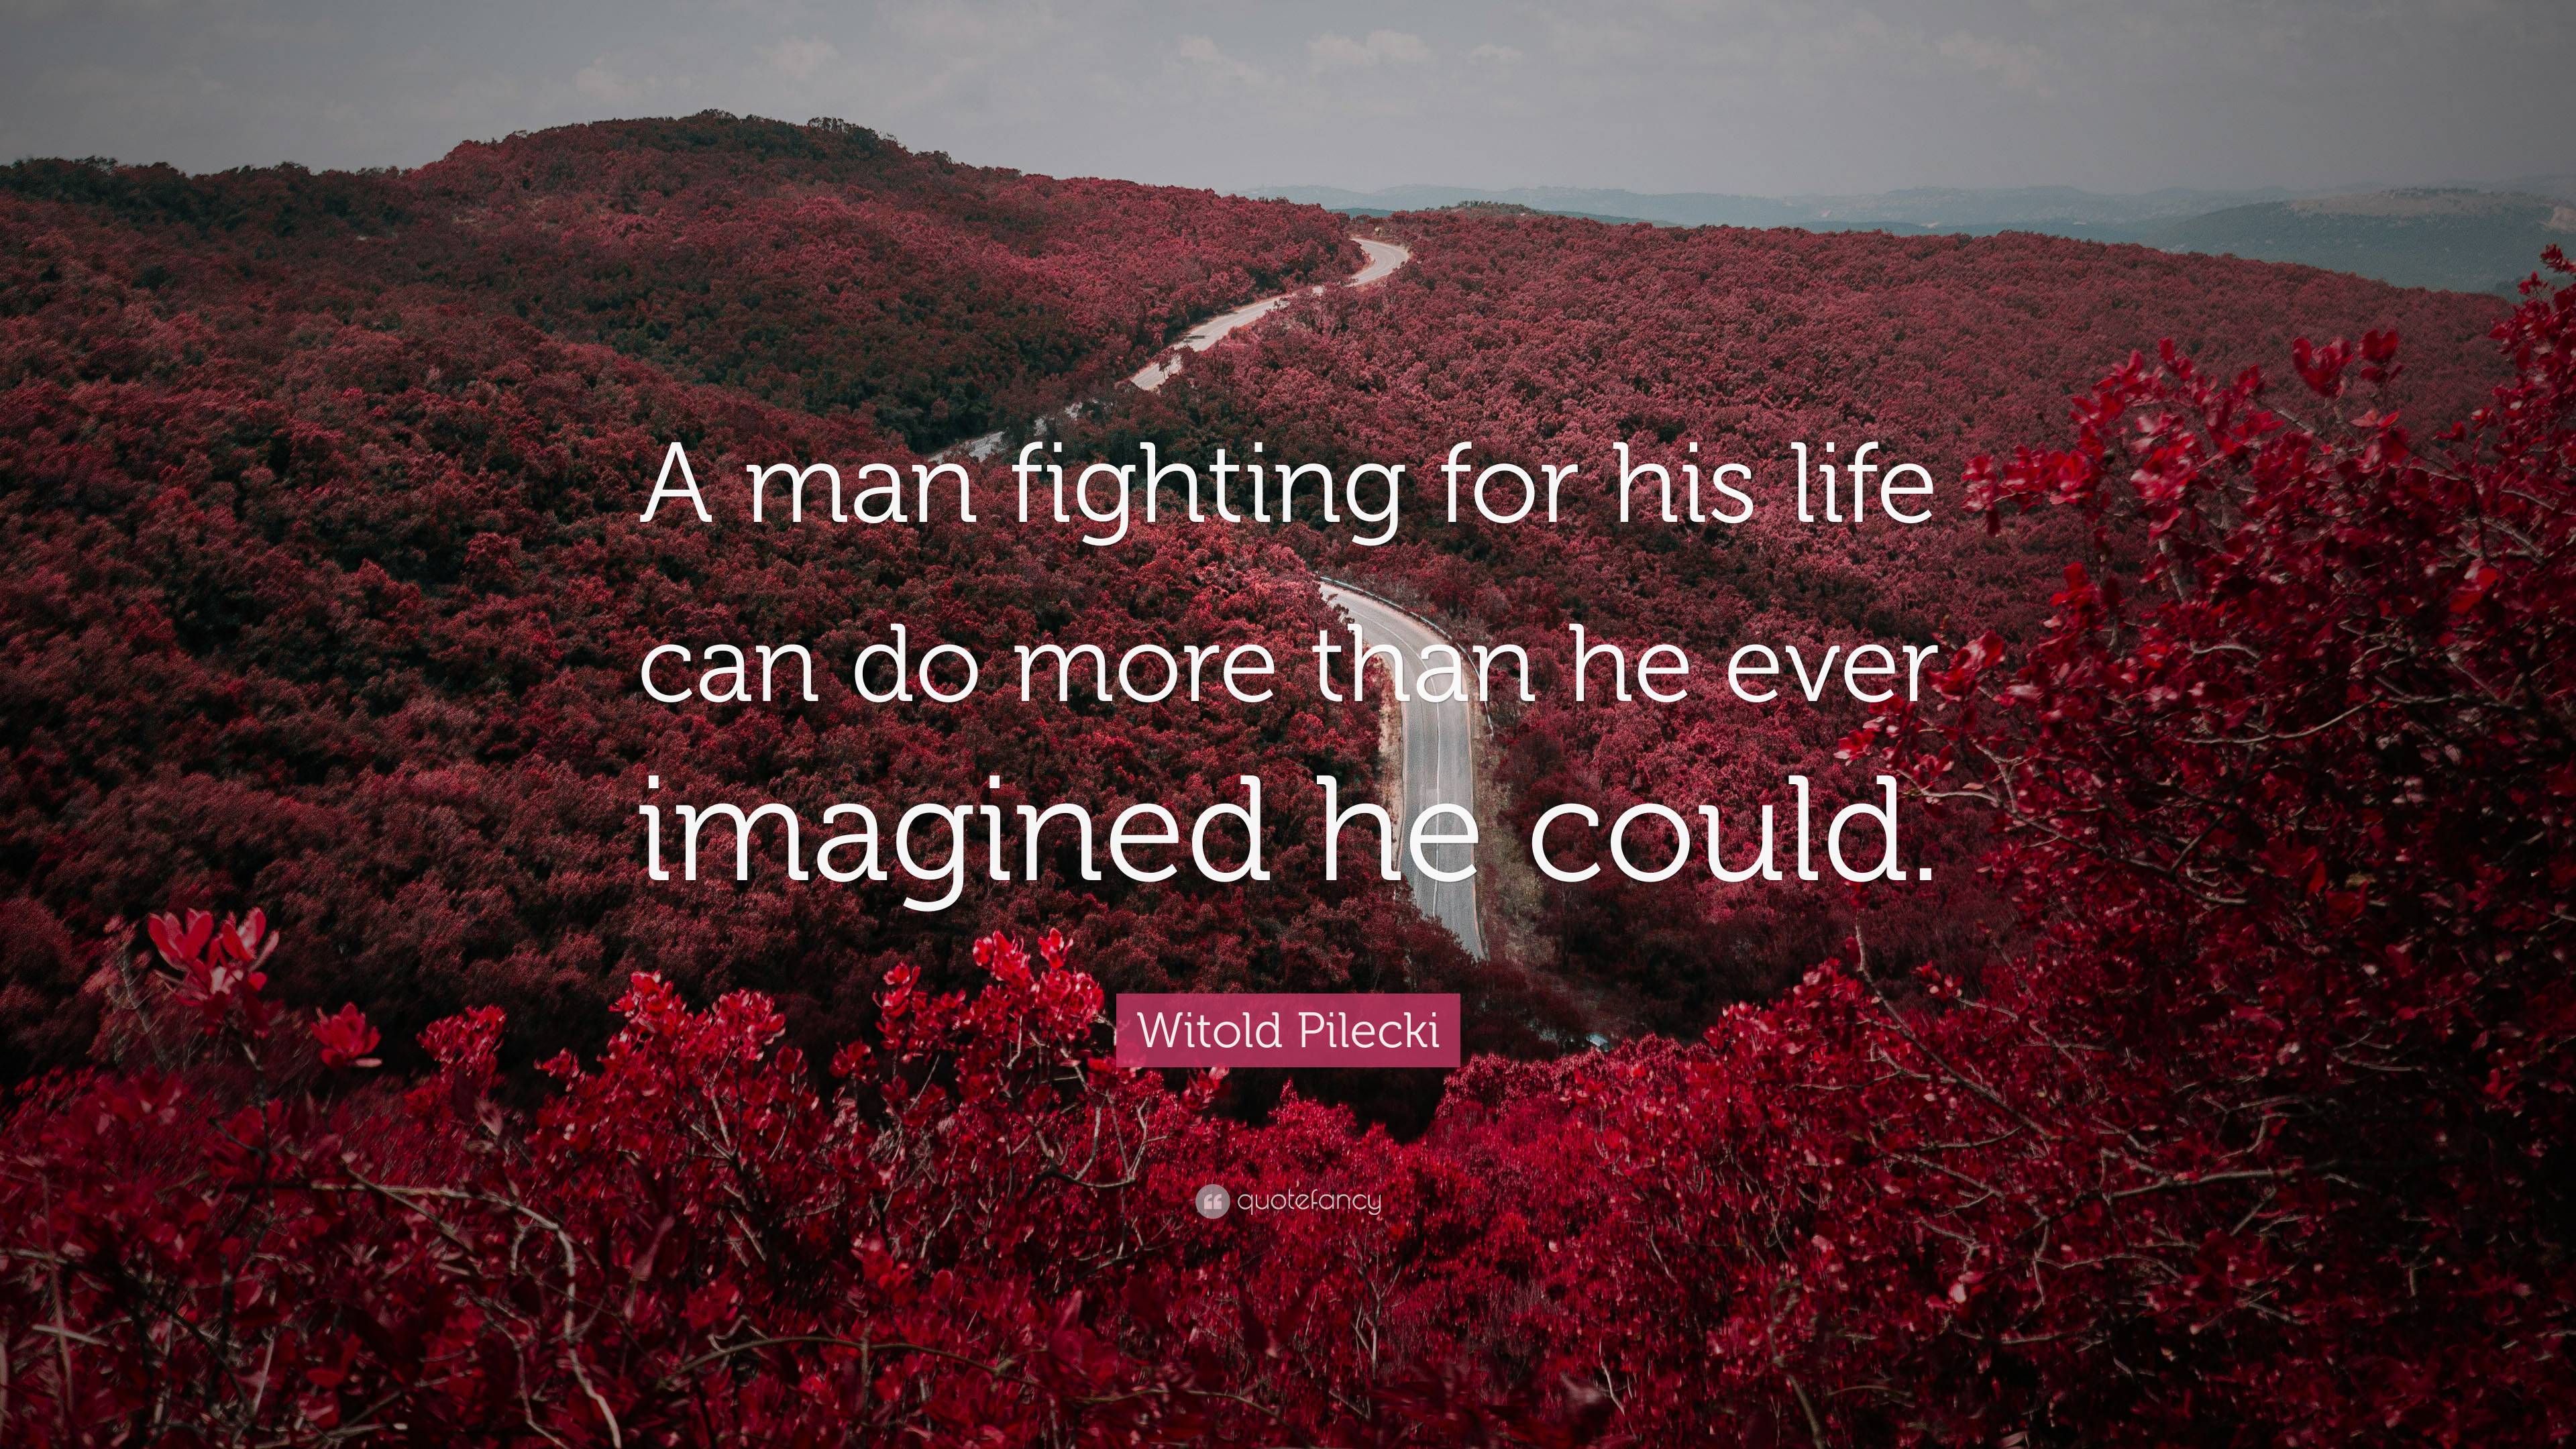 Witold Pilecki Quote: “A man fighting for his life can do more than he ...